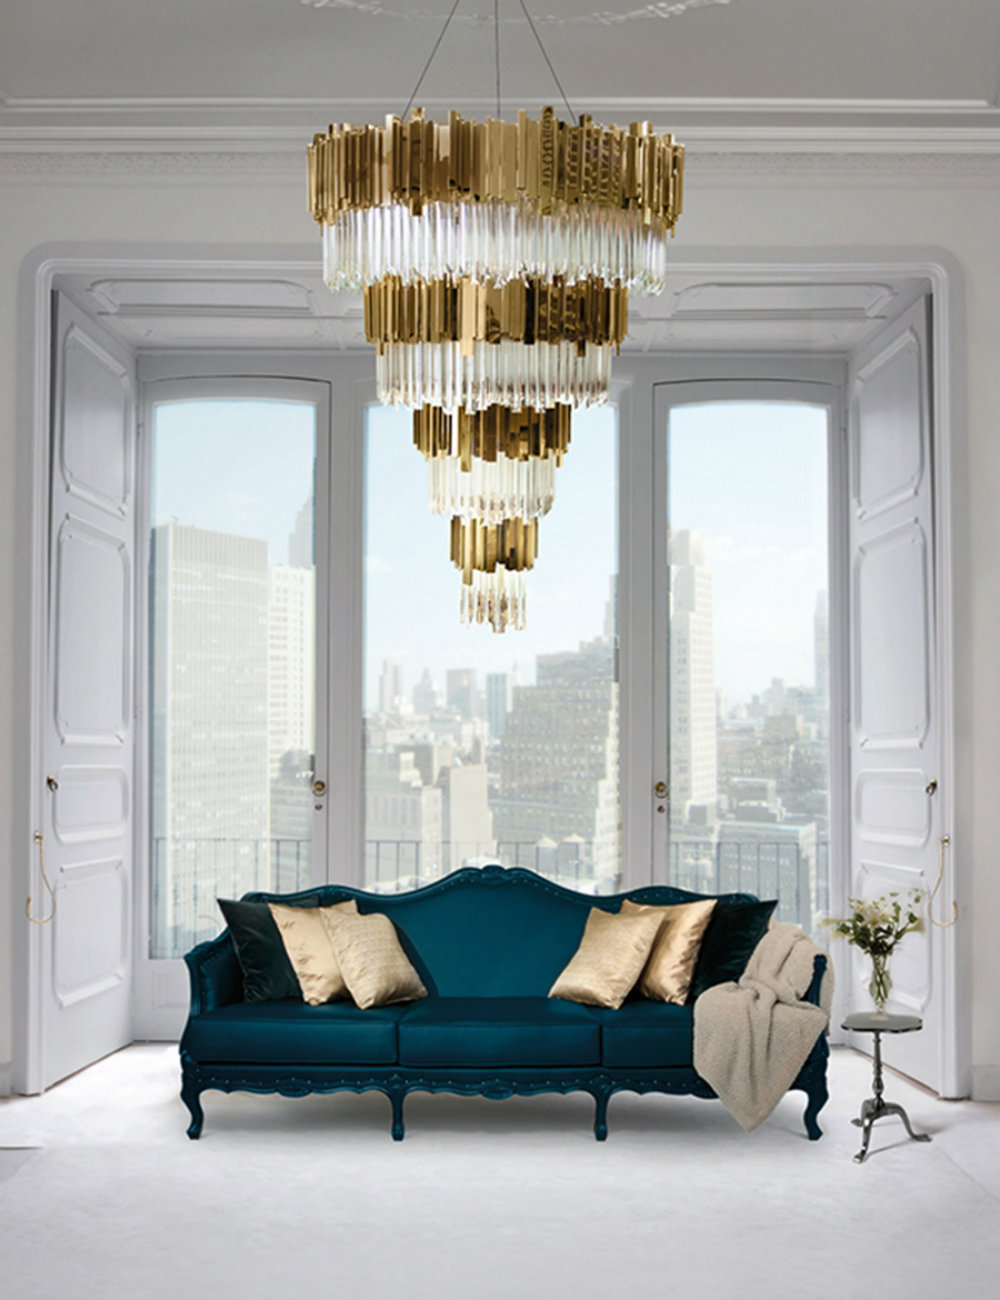 Lighting Inspiration: 5 Outstanding Chandelier For Your Home Decor